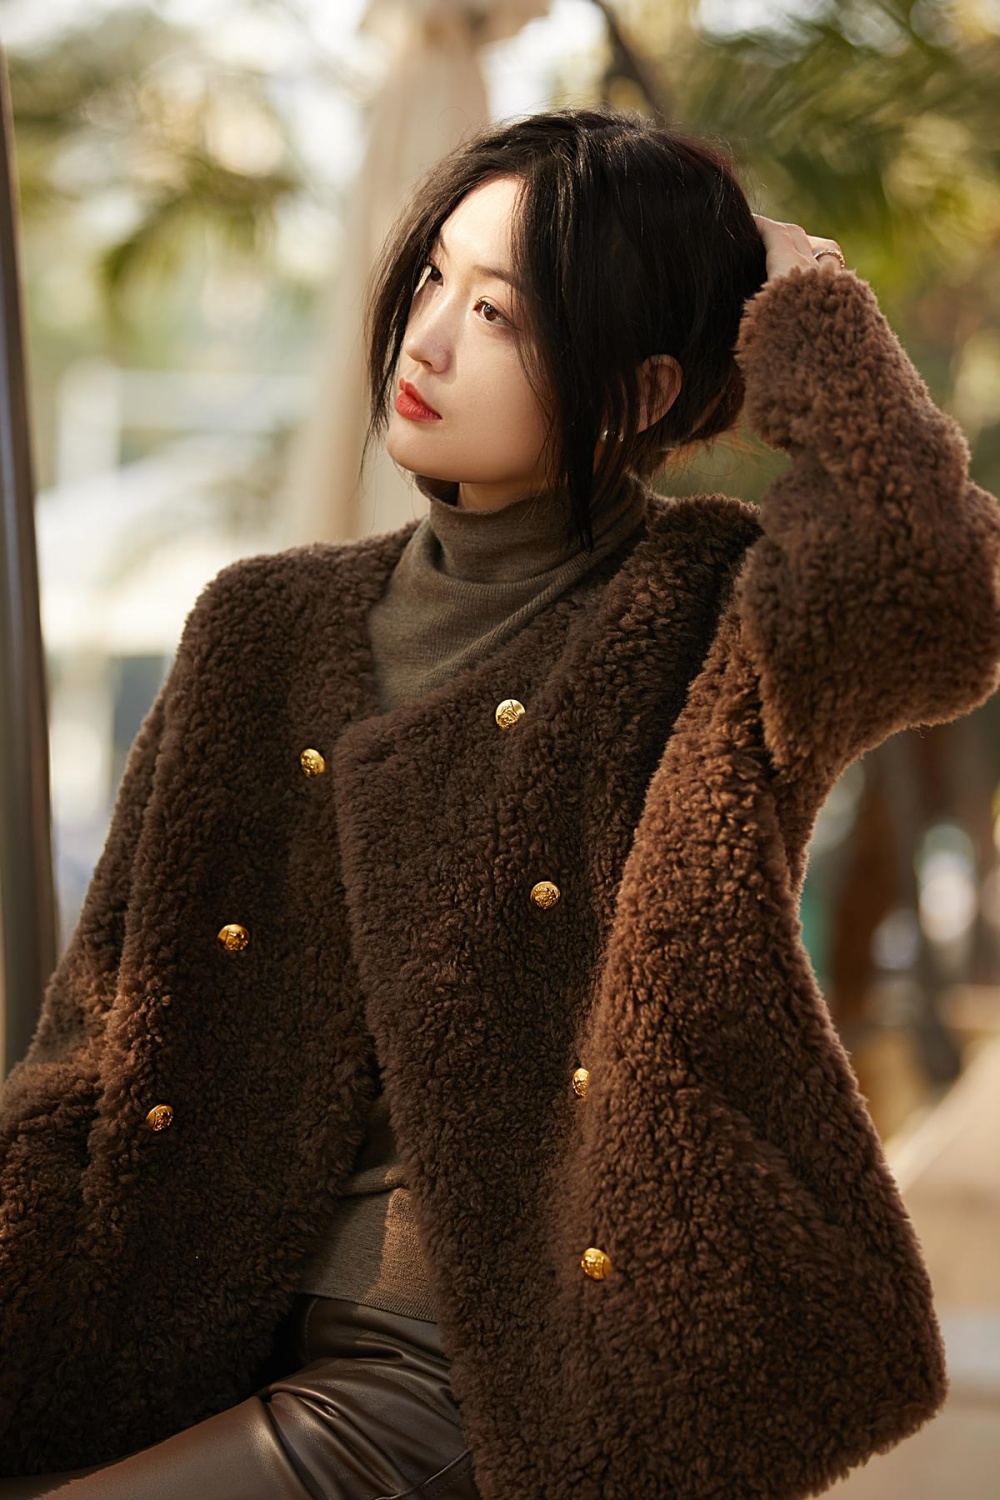 Autumn and winter wool lambs wool thermal coat